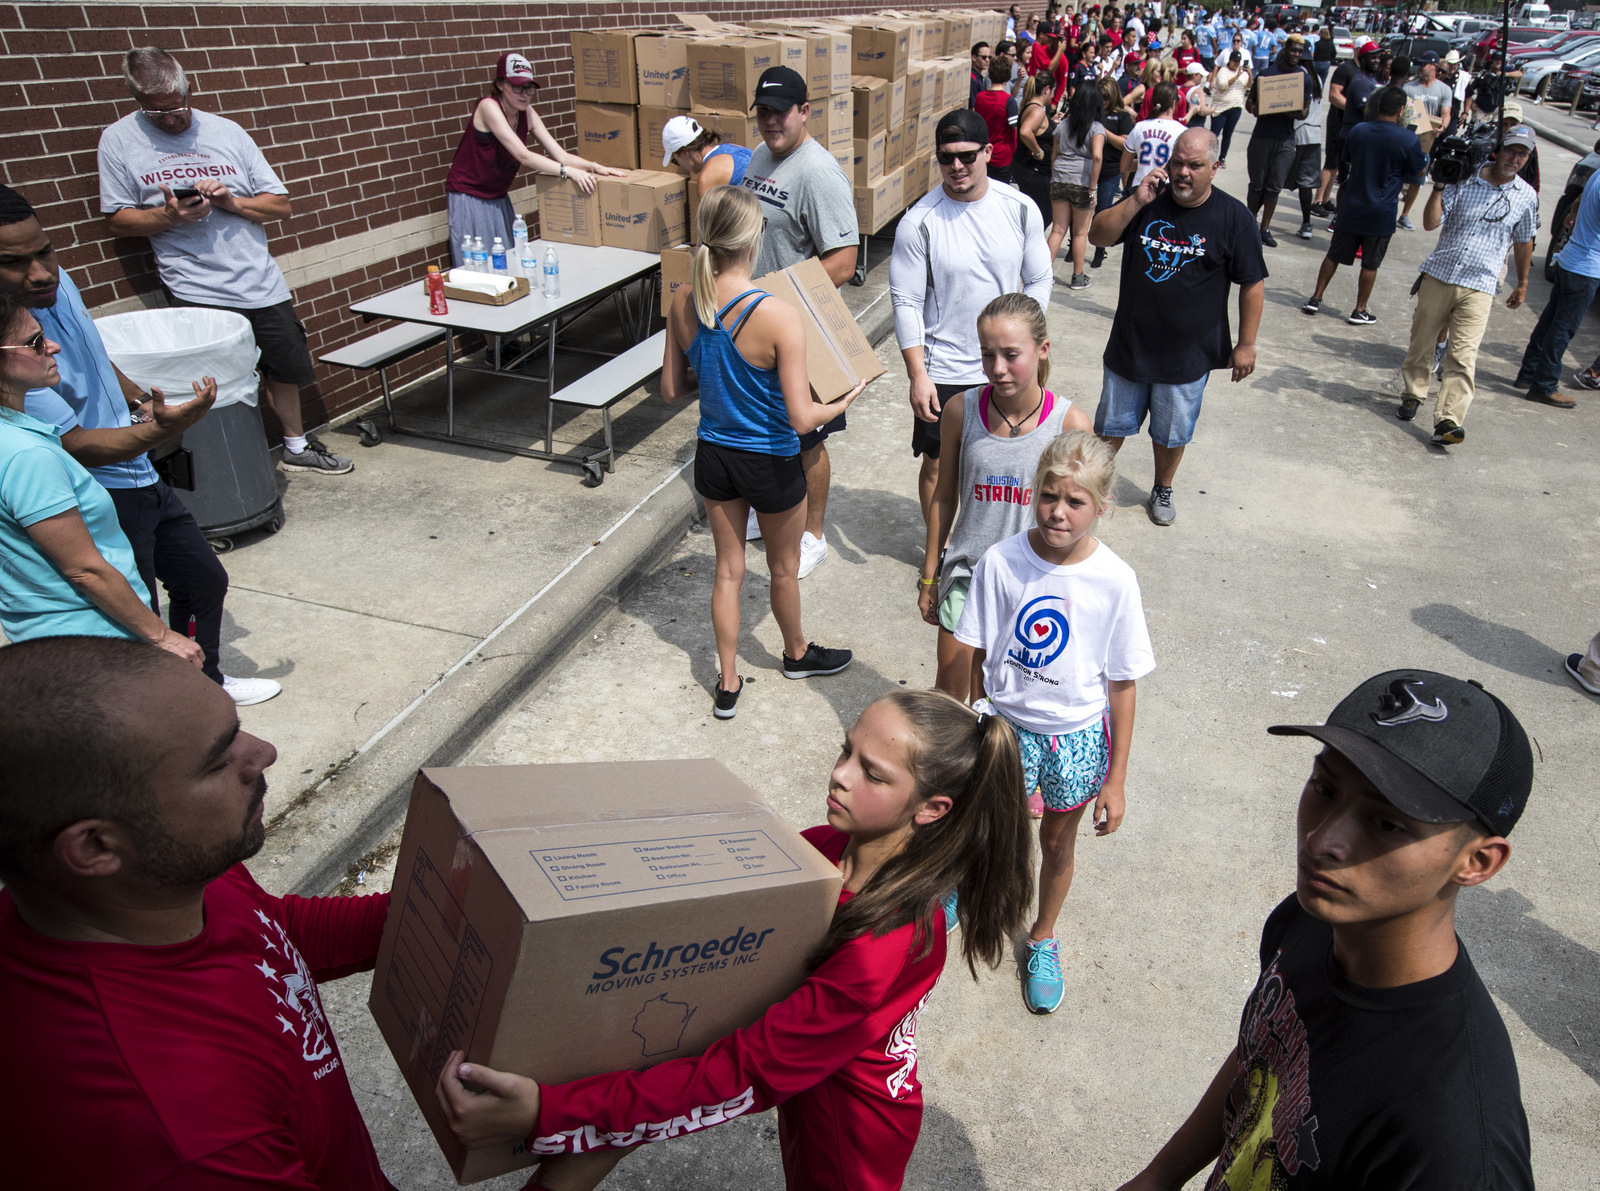 Volunteers unload a truck of relief supplies for people impacted by Hurricane Harvey on Sunday, Sept. 3, 2017, in Houston. J.J. Watt's Hurricane Harvey Relief Fund has raised millions of dollars to help those affected by the storm. (Brett Coomer/Houston Chronicle via AP)